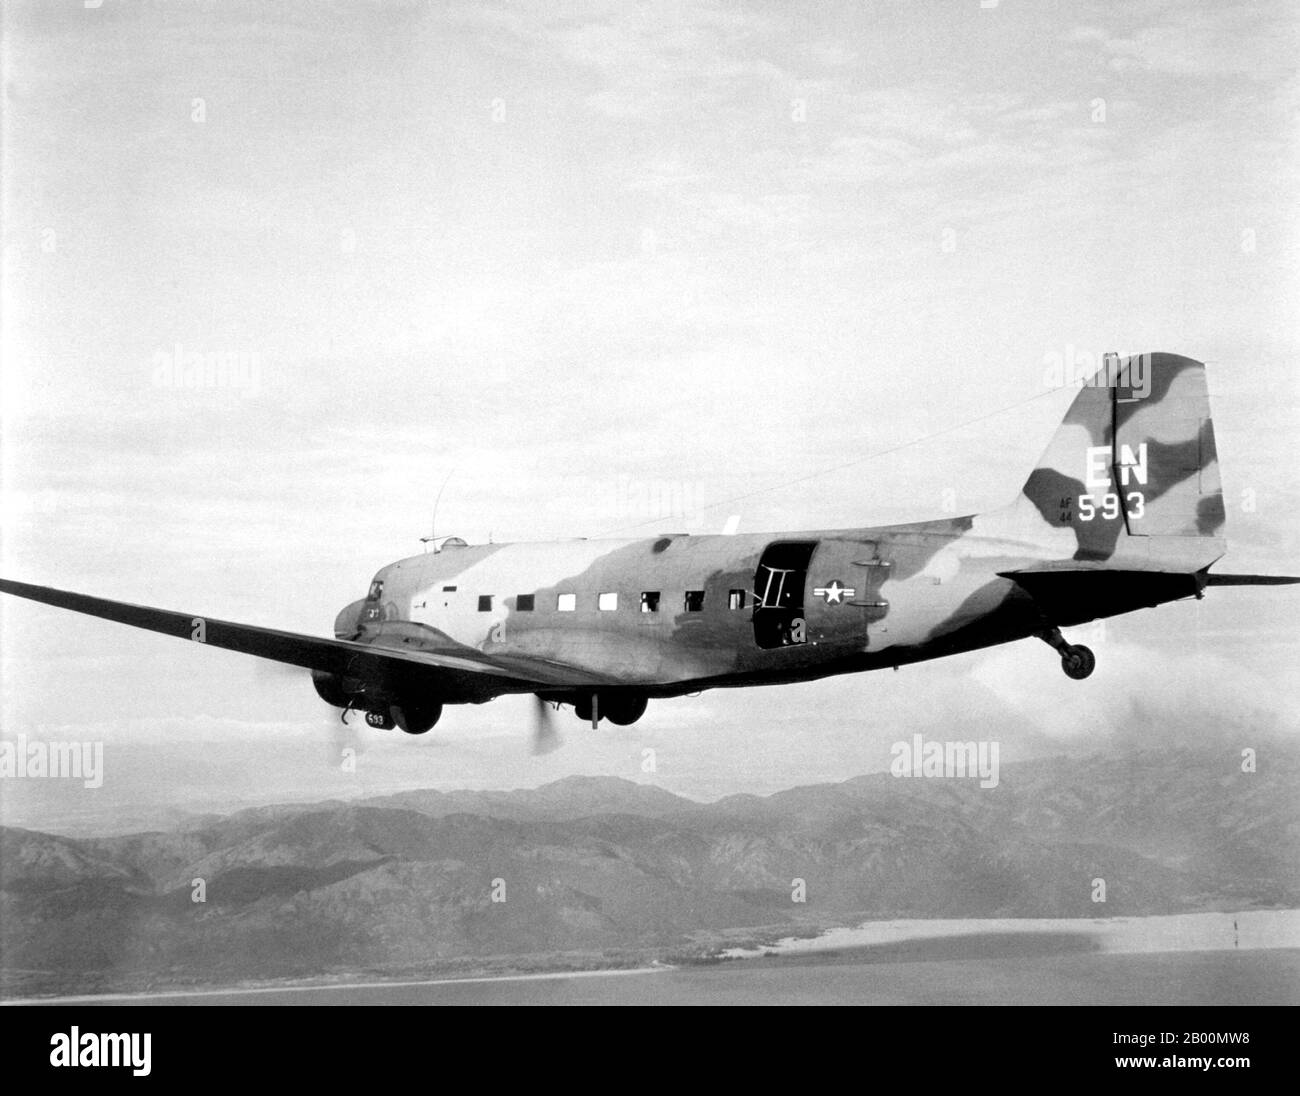 Vietnam: A U.S. Air Force Douglas AC-47D Spooky gunship flying out of Nha Trang Air Base, South Vietnam, in 1968-69.  The Second Indochina War, known in America as the Vietnam War, was a Cold War era military conflict that occurred in Vietnam, Laos, and Cambodia from 1 November 1955 to the fall of Saigon on 30 April 1975. This war followed the First Indochina War and was fought between North Vietnam, supported by its communist allies, and the government of South Vietnam, supported by the U.S. and other anti-communist nations. Stock Photo